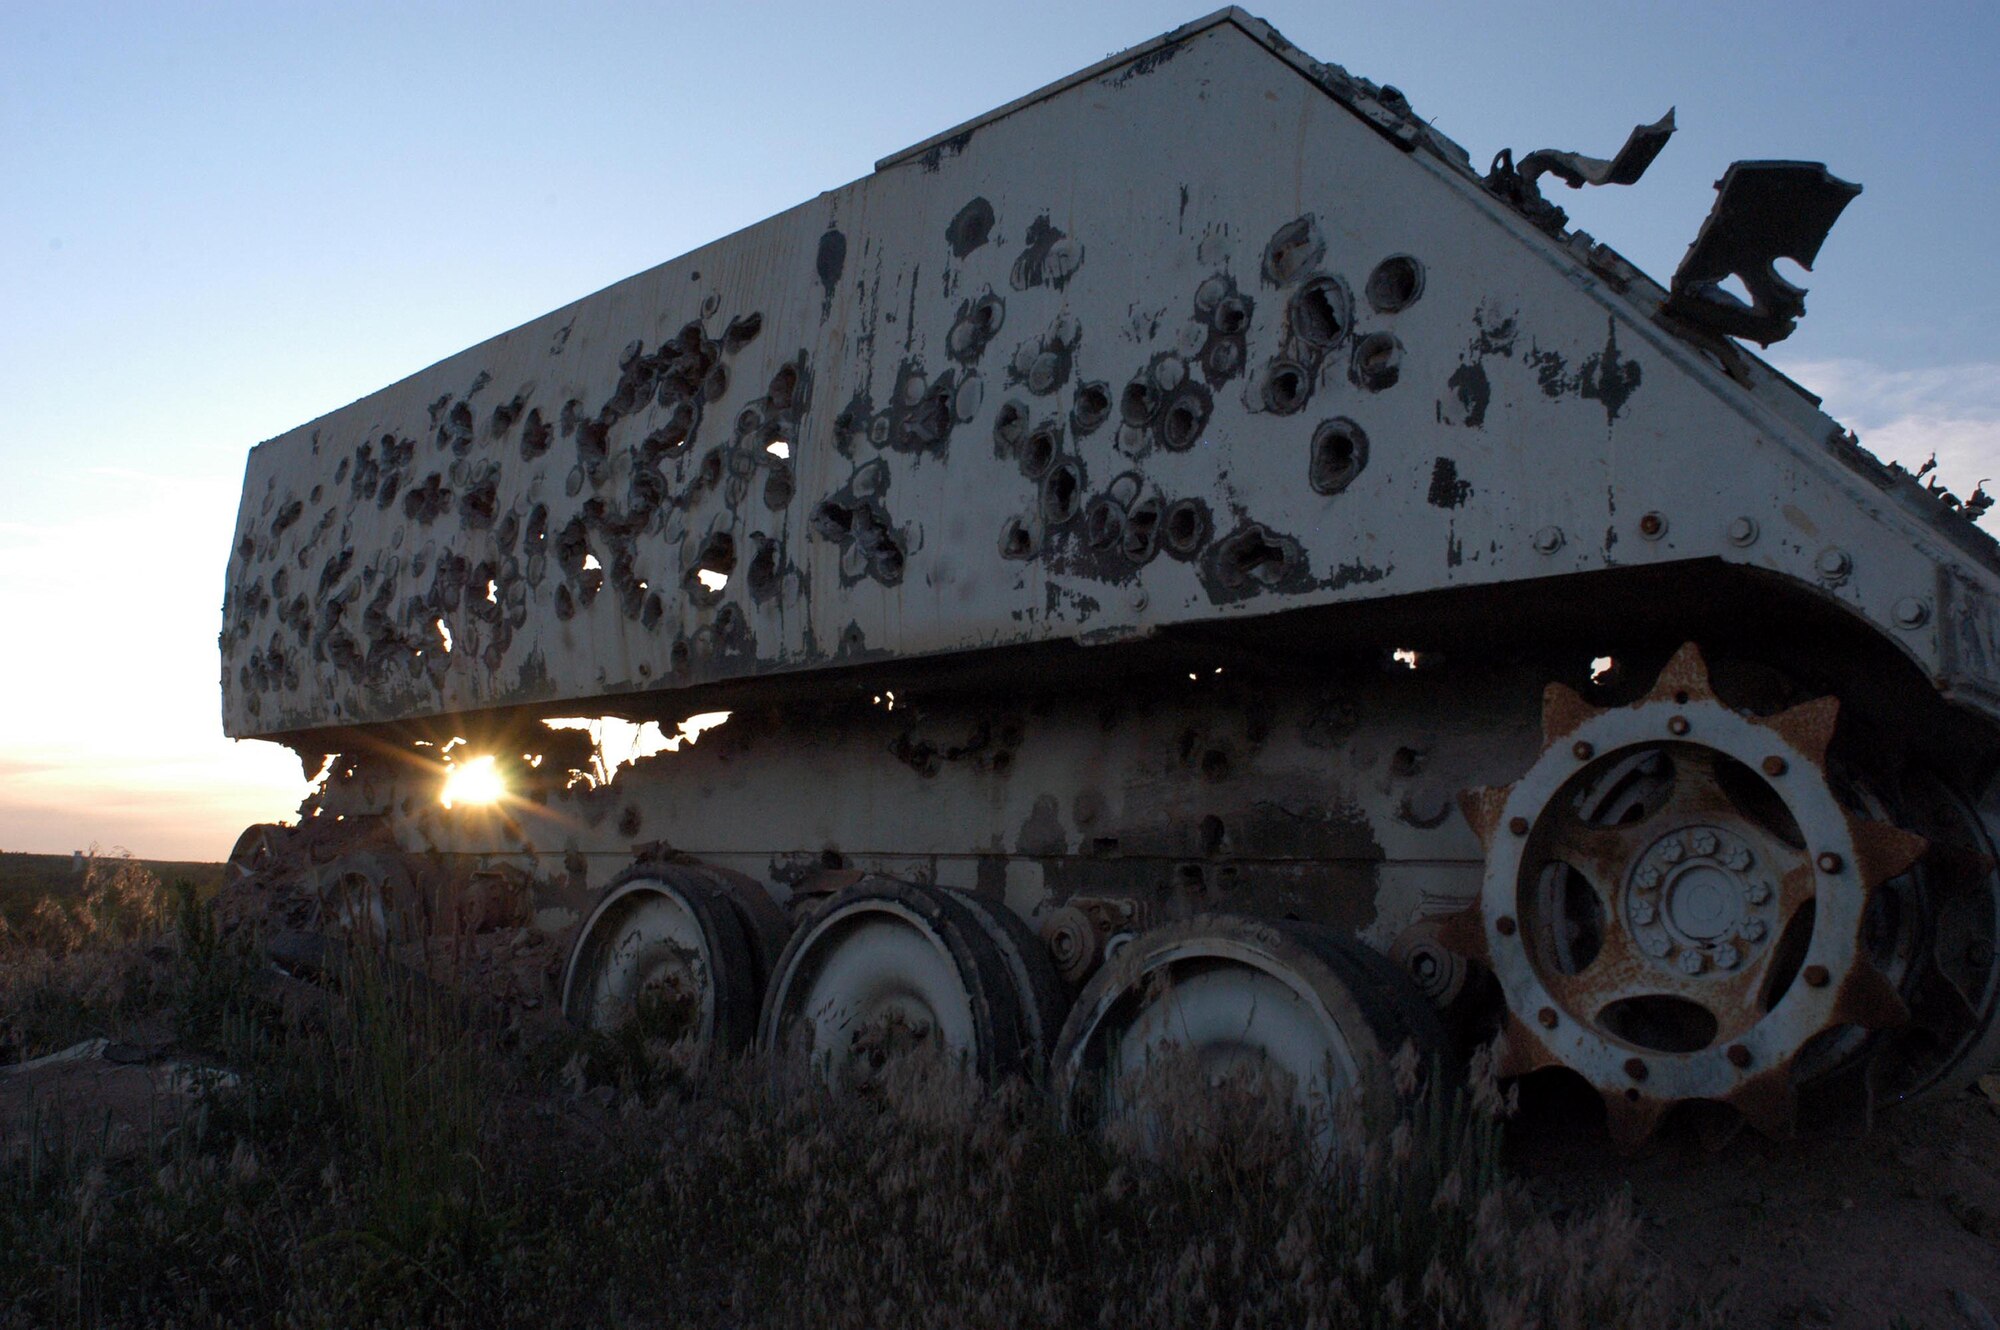 The setting sun peeks through an armored personnel carrier riddled with holes from A-10 30mm training rounds.